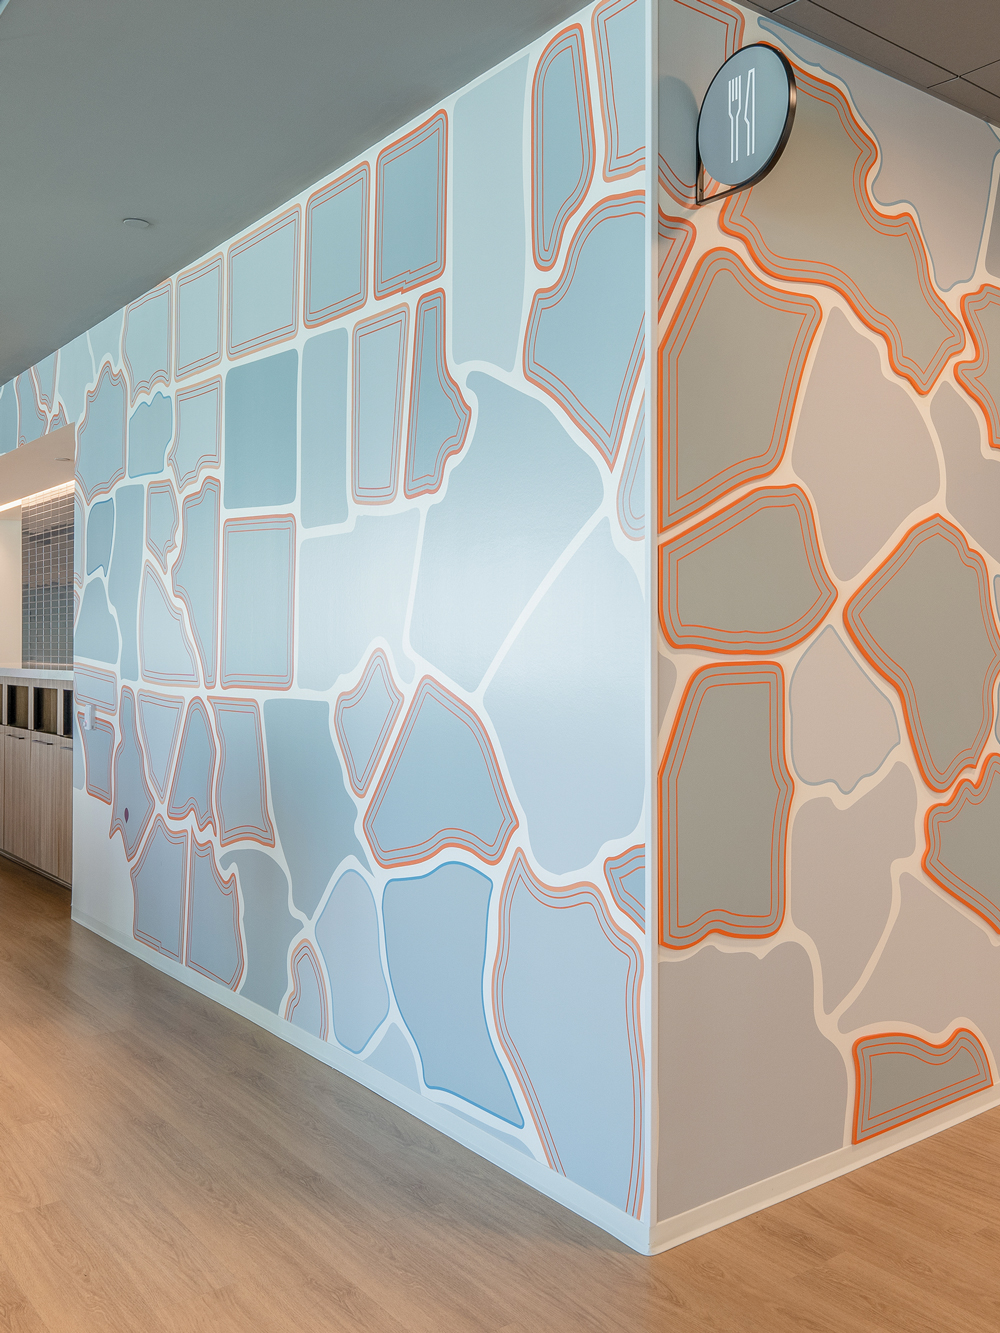 wall graphic with abstract gray and blue shapes with a bright orange outline